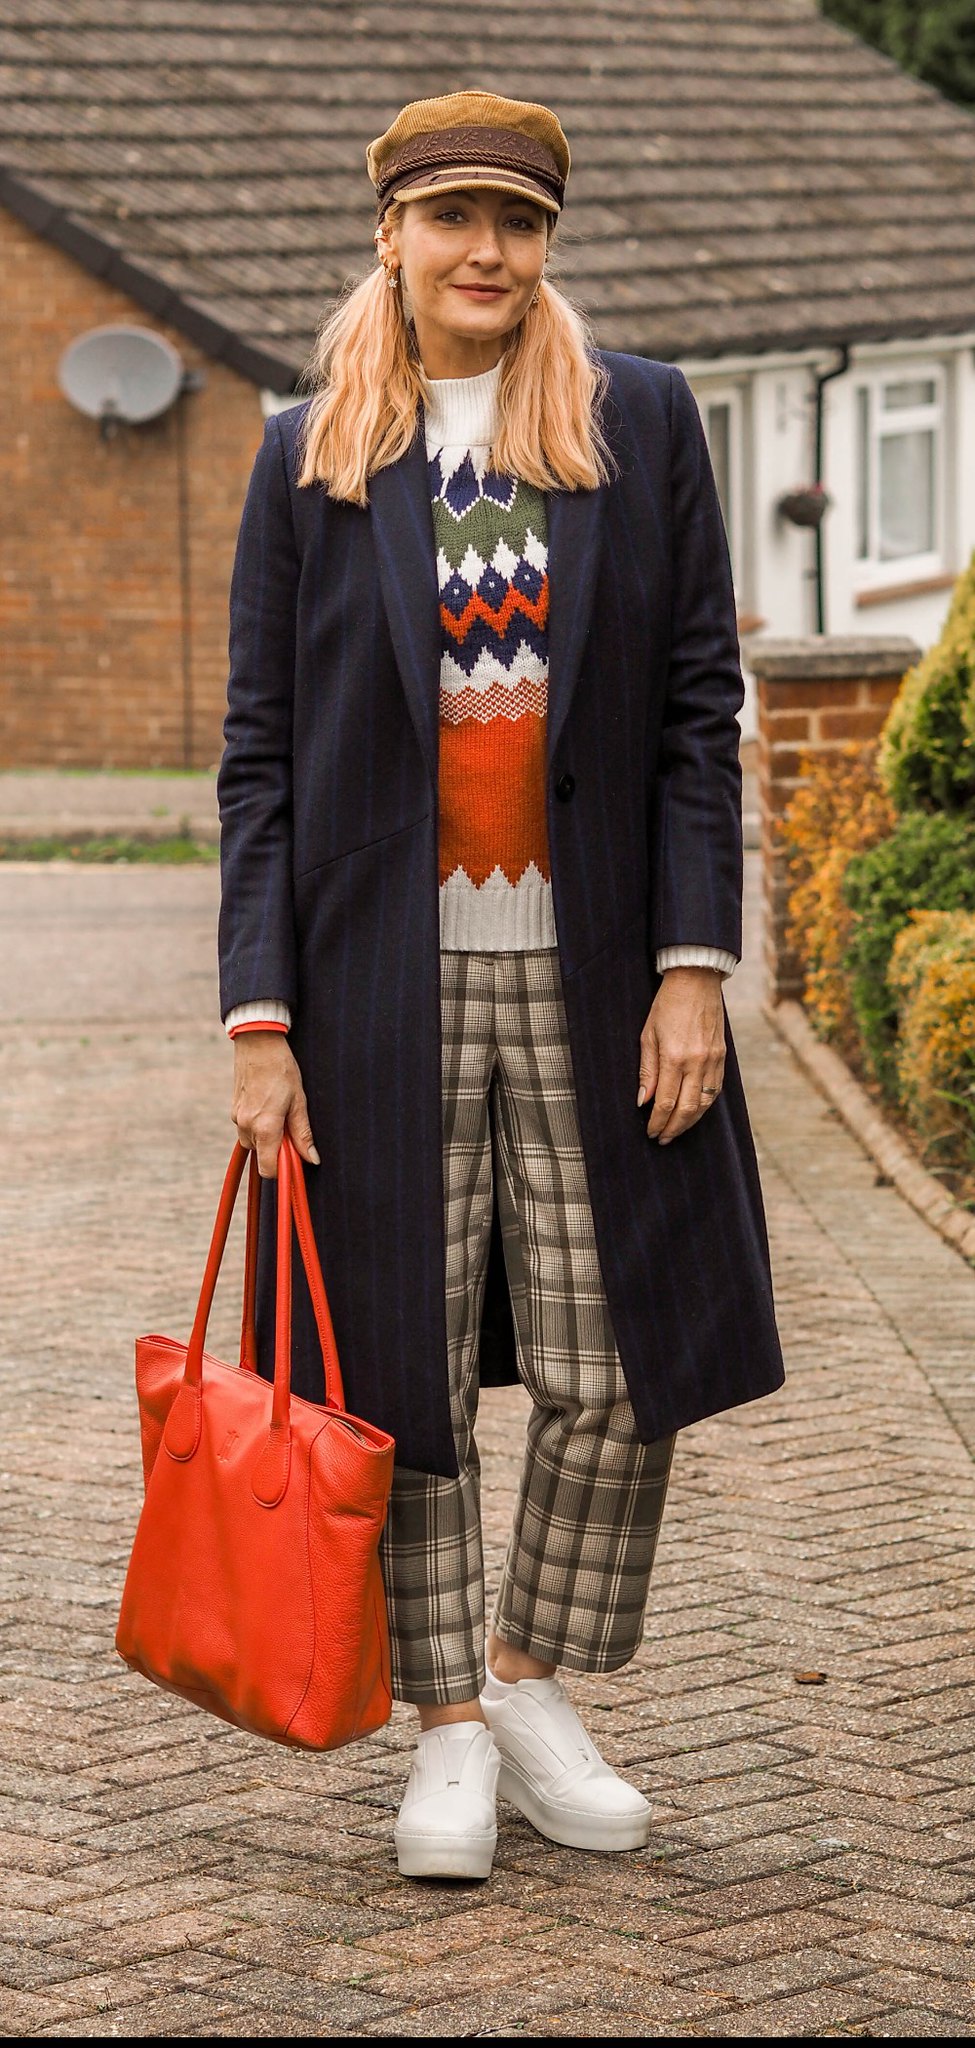 Styling a Classic Tailored Coat With Bold Winter Patterns (navy pinstripe coat, orange, green and white Nordic patterned sweater, green check trousers, orange tote bag, white chunky trainers, camel baker boy hat) | Not Dressed As Lamb, Over 40 Fashion